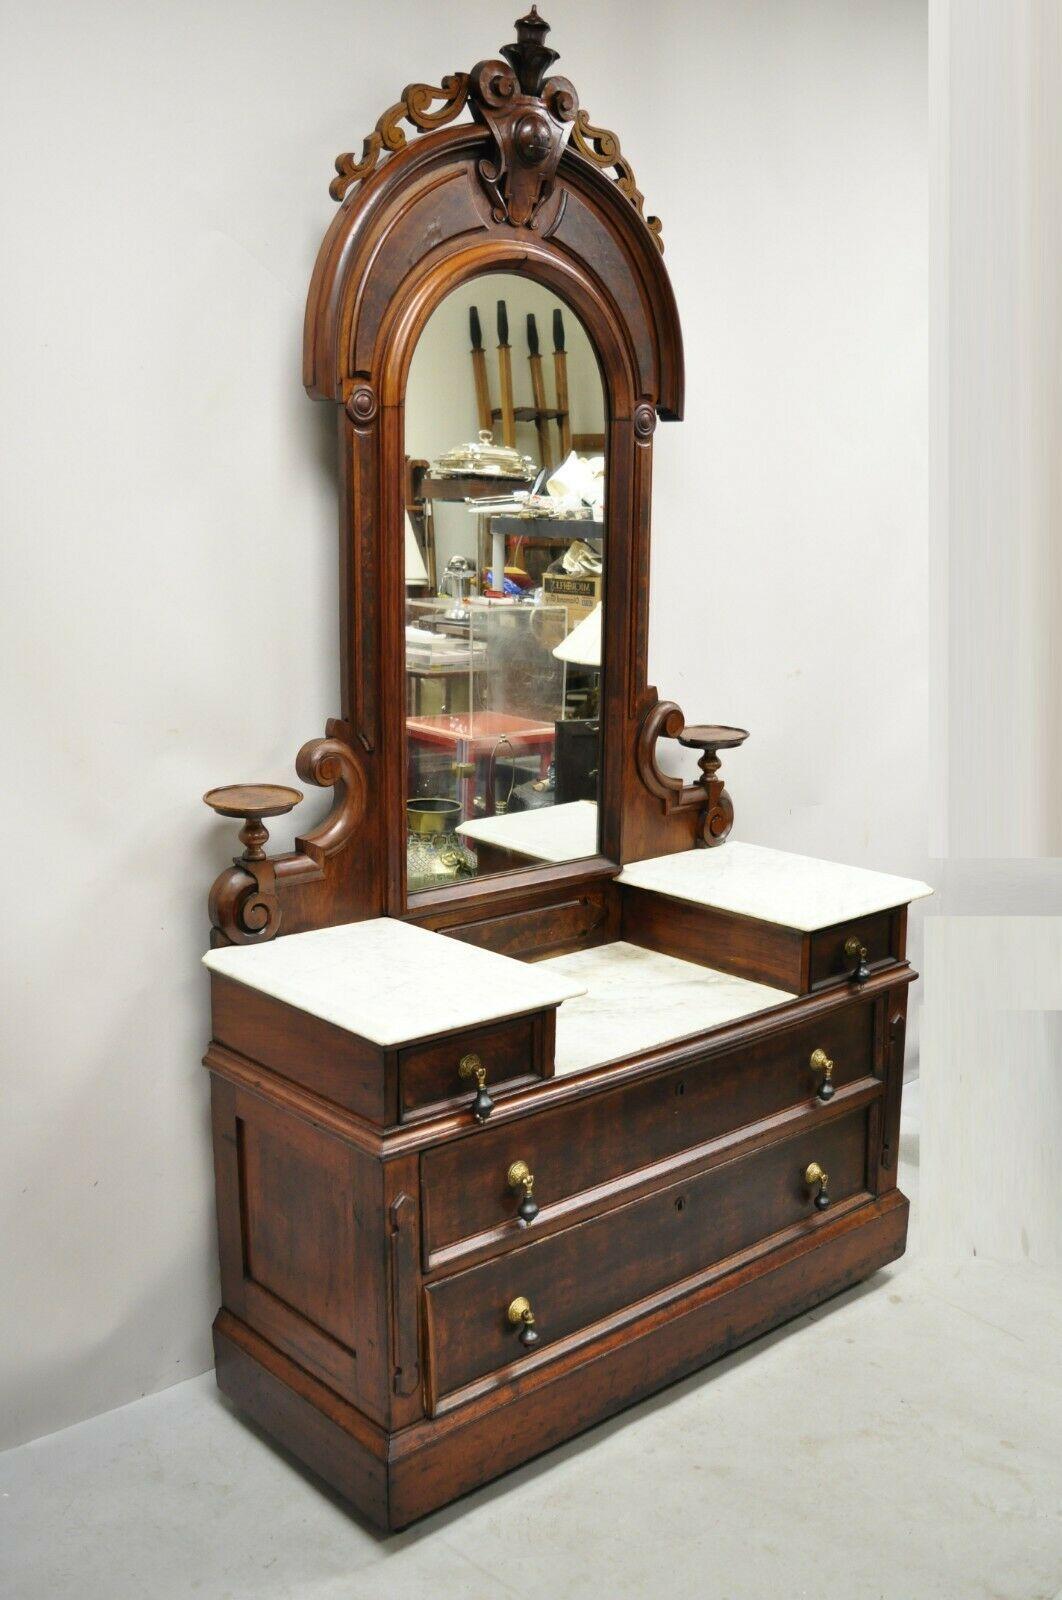 Antique Eastlake Victorian walnut 3 marble tier dresser with tall mirror. Item features (3) Marble tops, vanity mirror with carved pediment, no key, but unlocked, very nice antique item, great style and form. Circa Late 19th Century. Measurements: